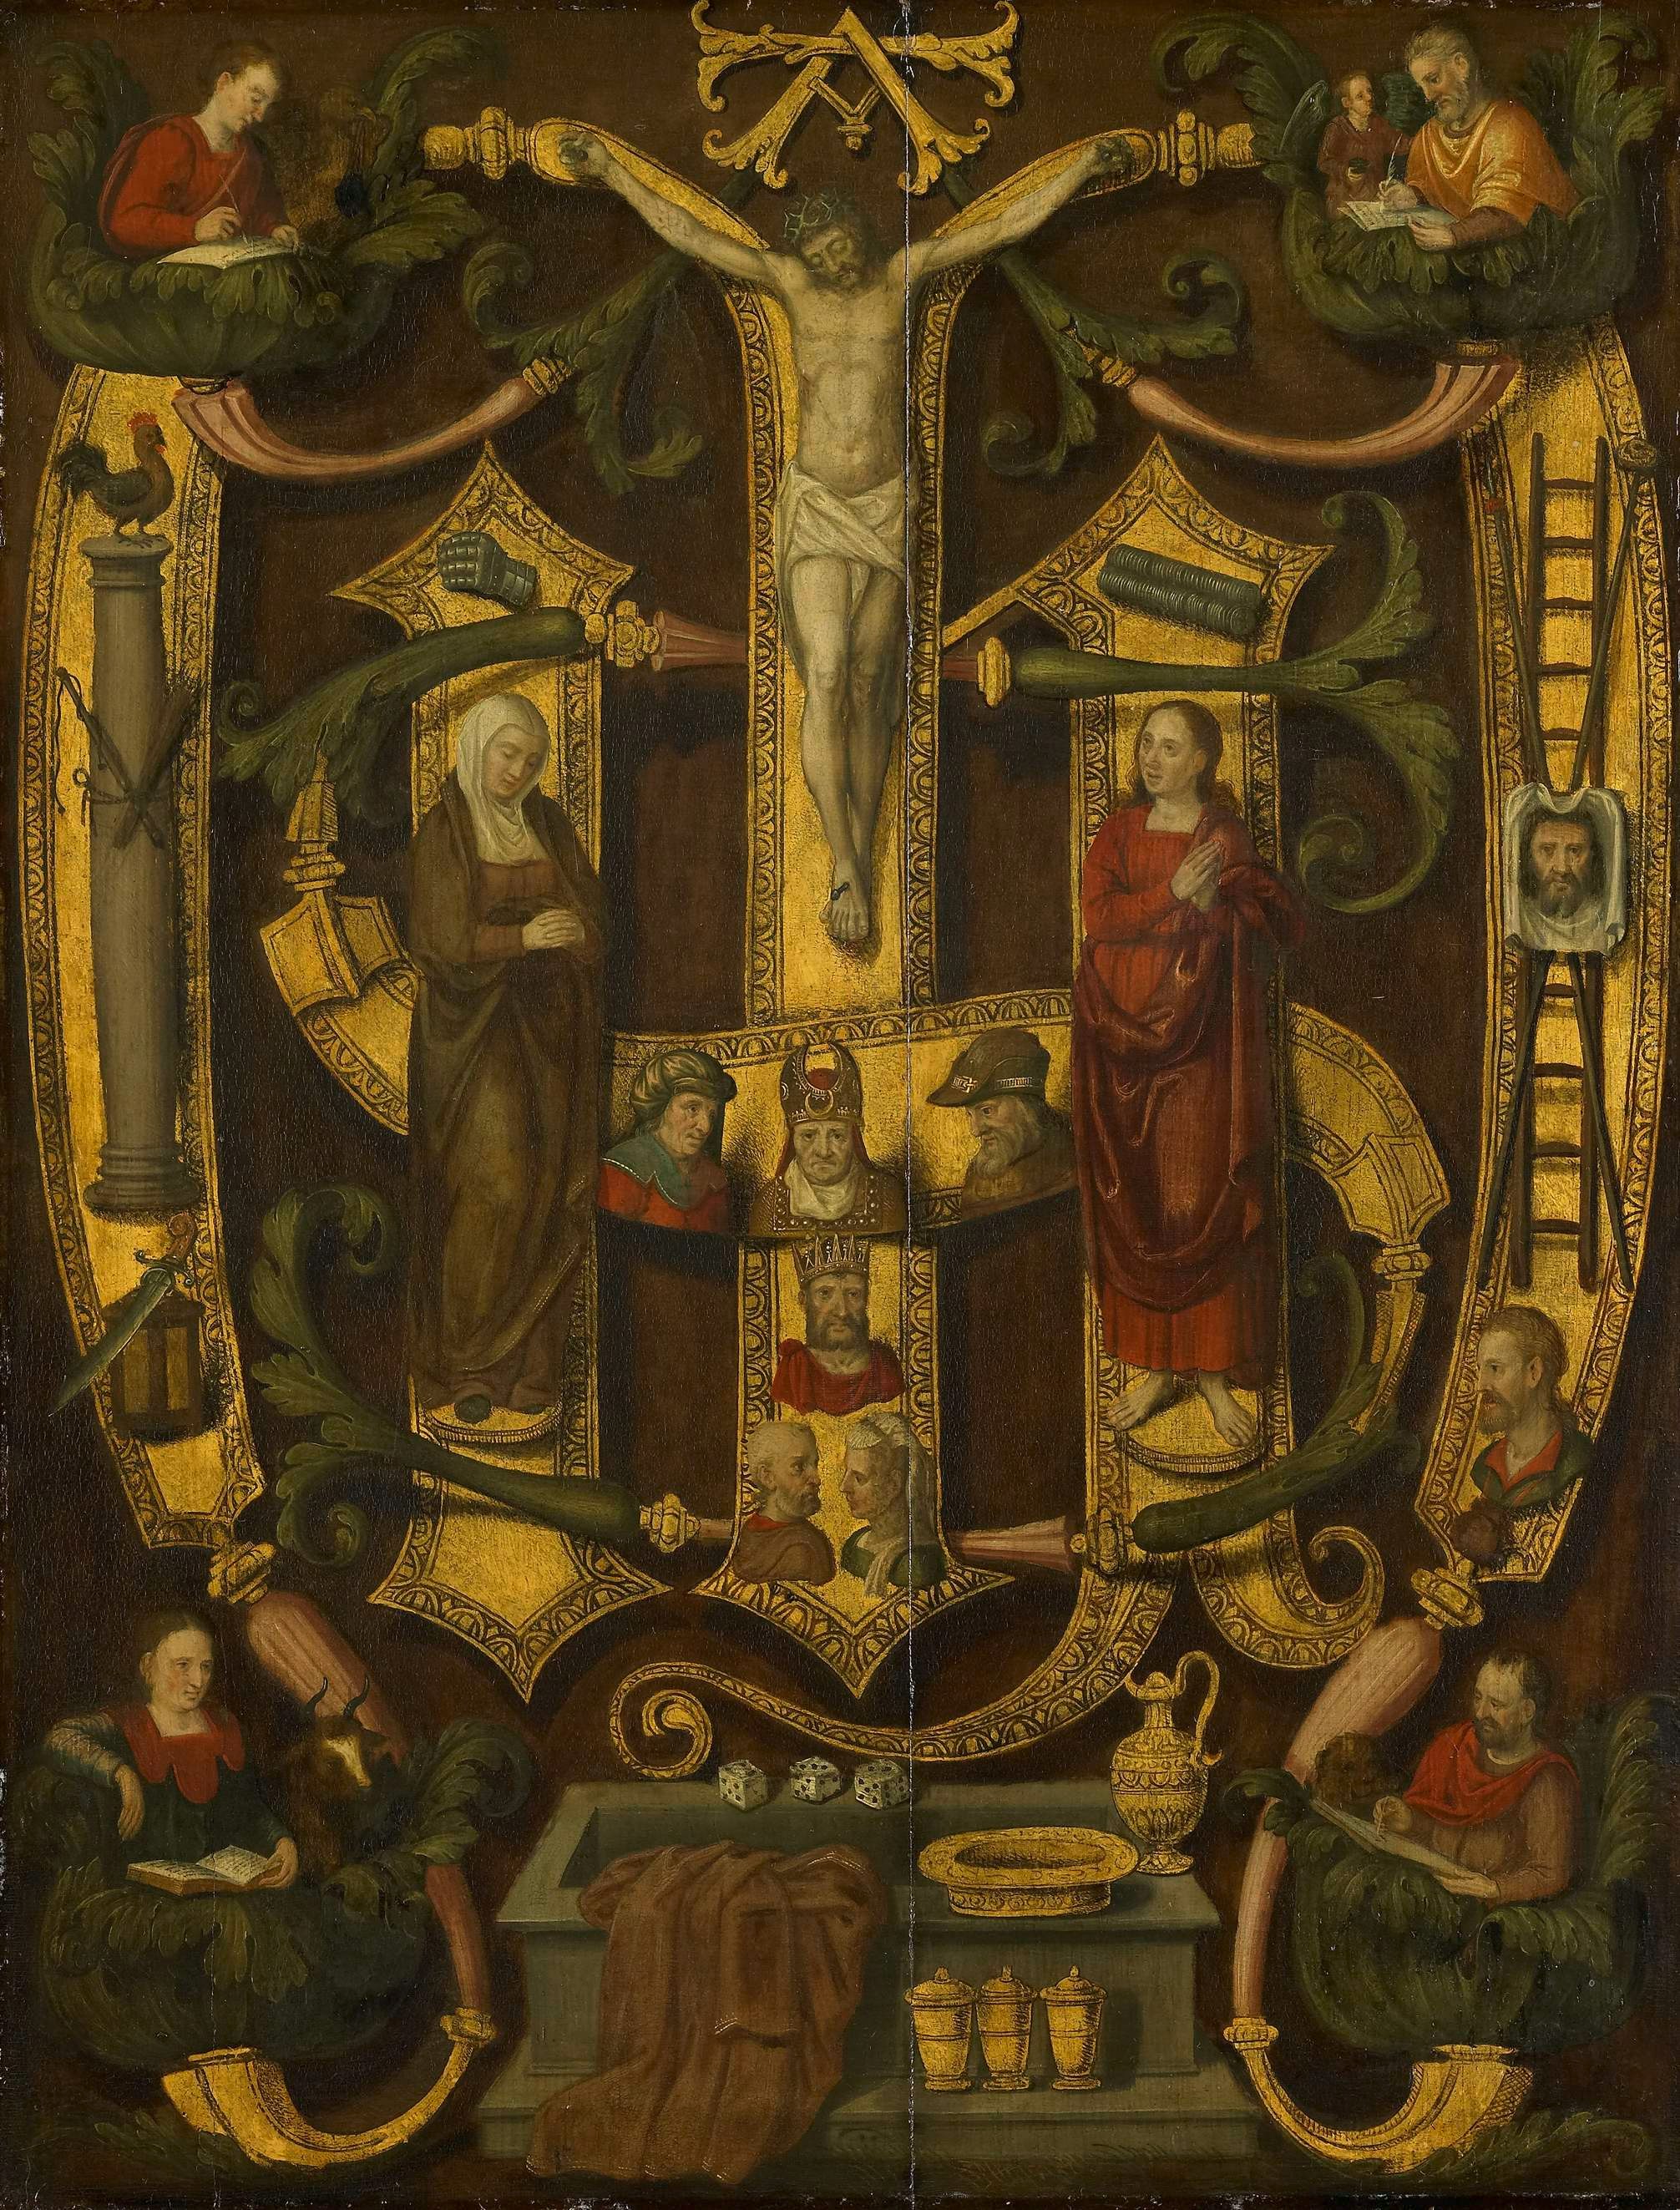 Title: Monogram of Christ combined with Instruments of the Passion.
Date: 1560.
Institution: Rijksmuseum.
Provider: Rijksmuseum.
Providing Country: Netherlands.
Public Domain